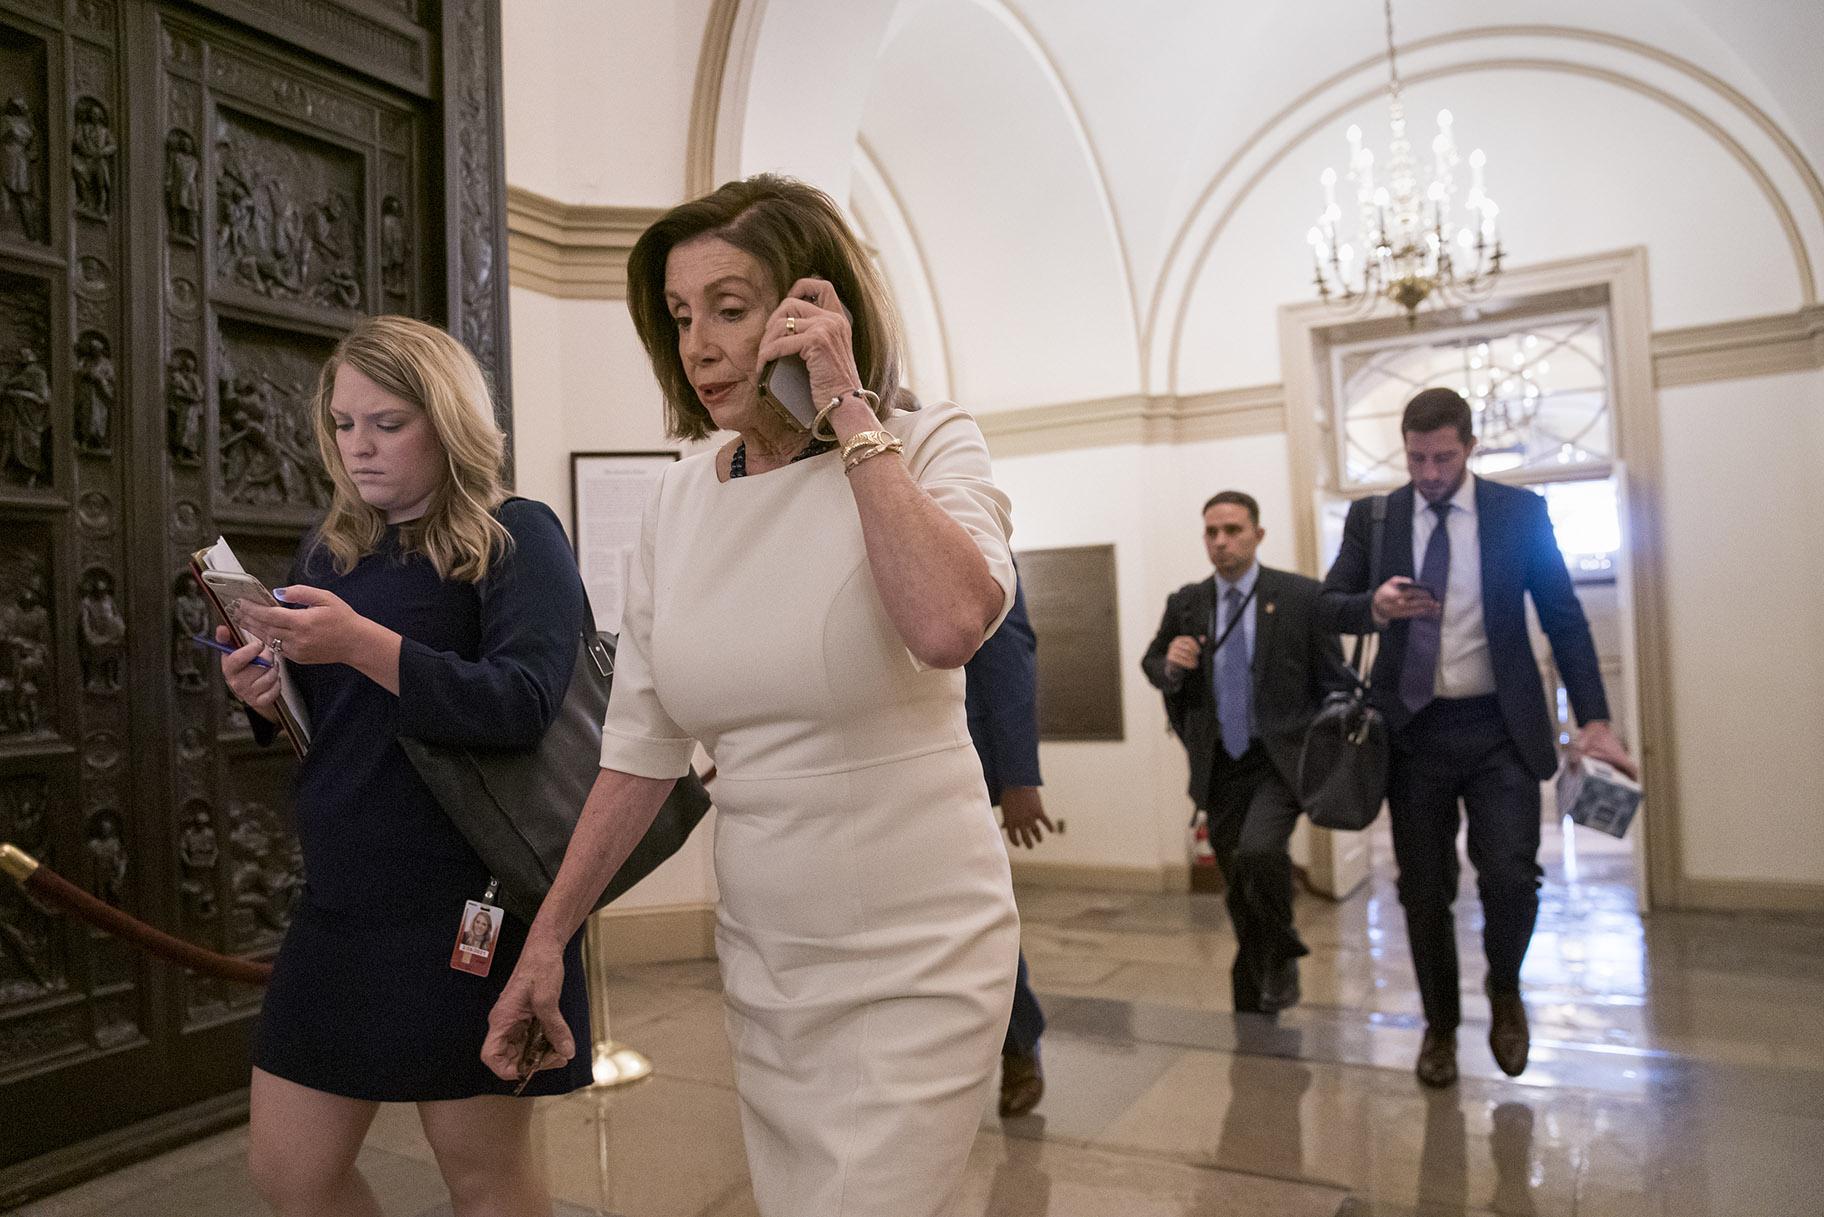 Speaker of the House Nancy Pelosi, D-Calif., arrives at the Capitol in Washington, Thursday, Sept. 26, 2019, just as Acting Director of National Intelligence Joseph Maguire is set to speak publicly for the first time about a secret whistleblower complaint involving President Donald Trump. (AP Photo / J. Scott Applewhite)